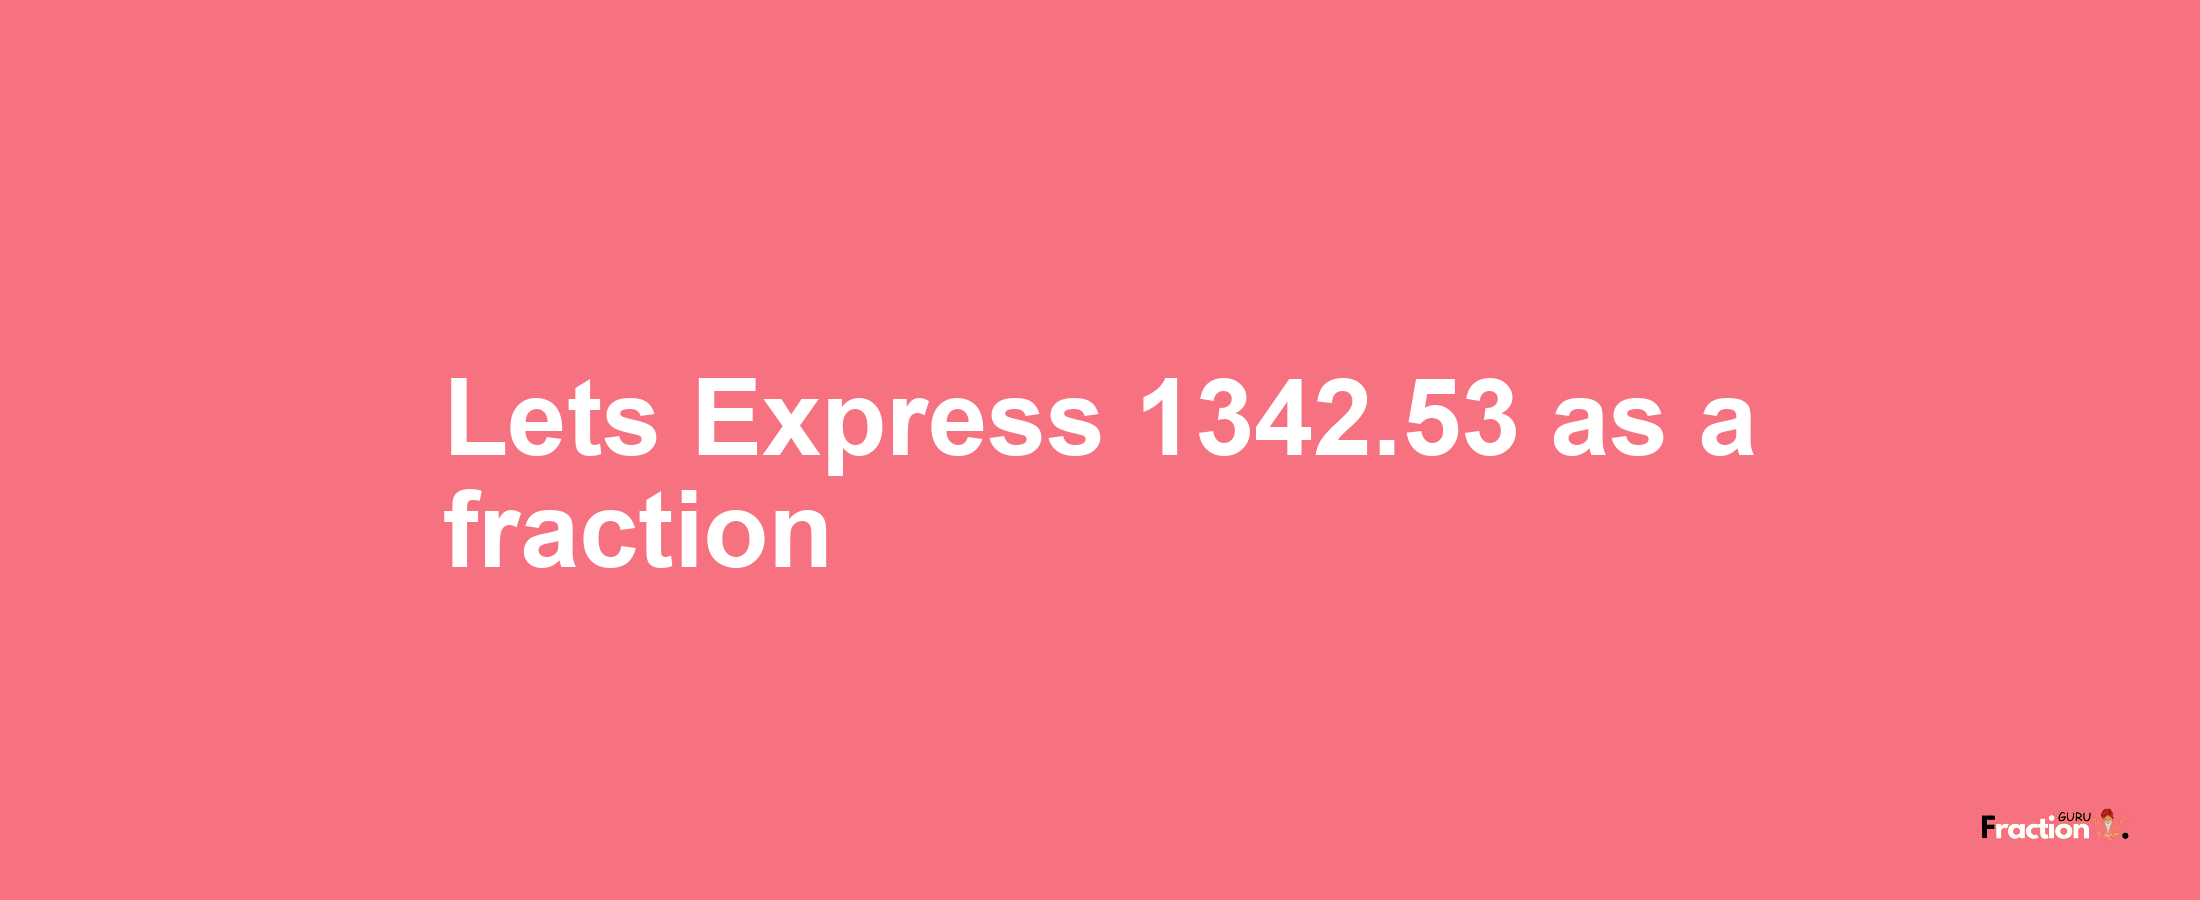 Lets Express 1342.53 as afraction